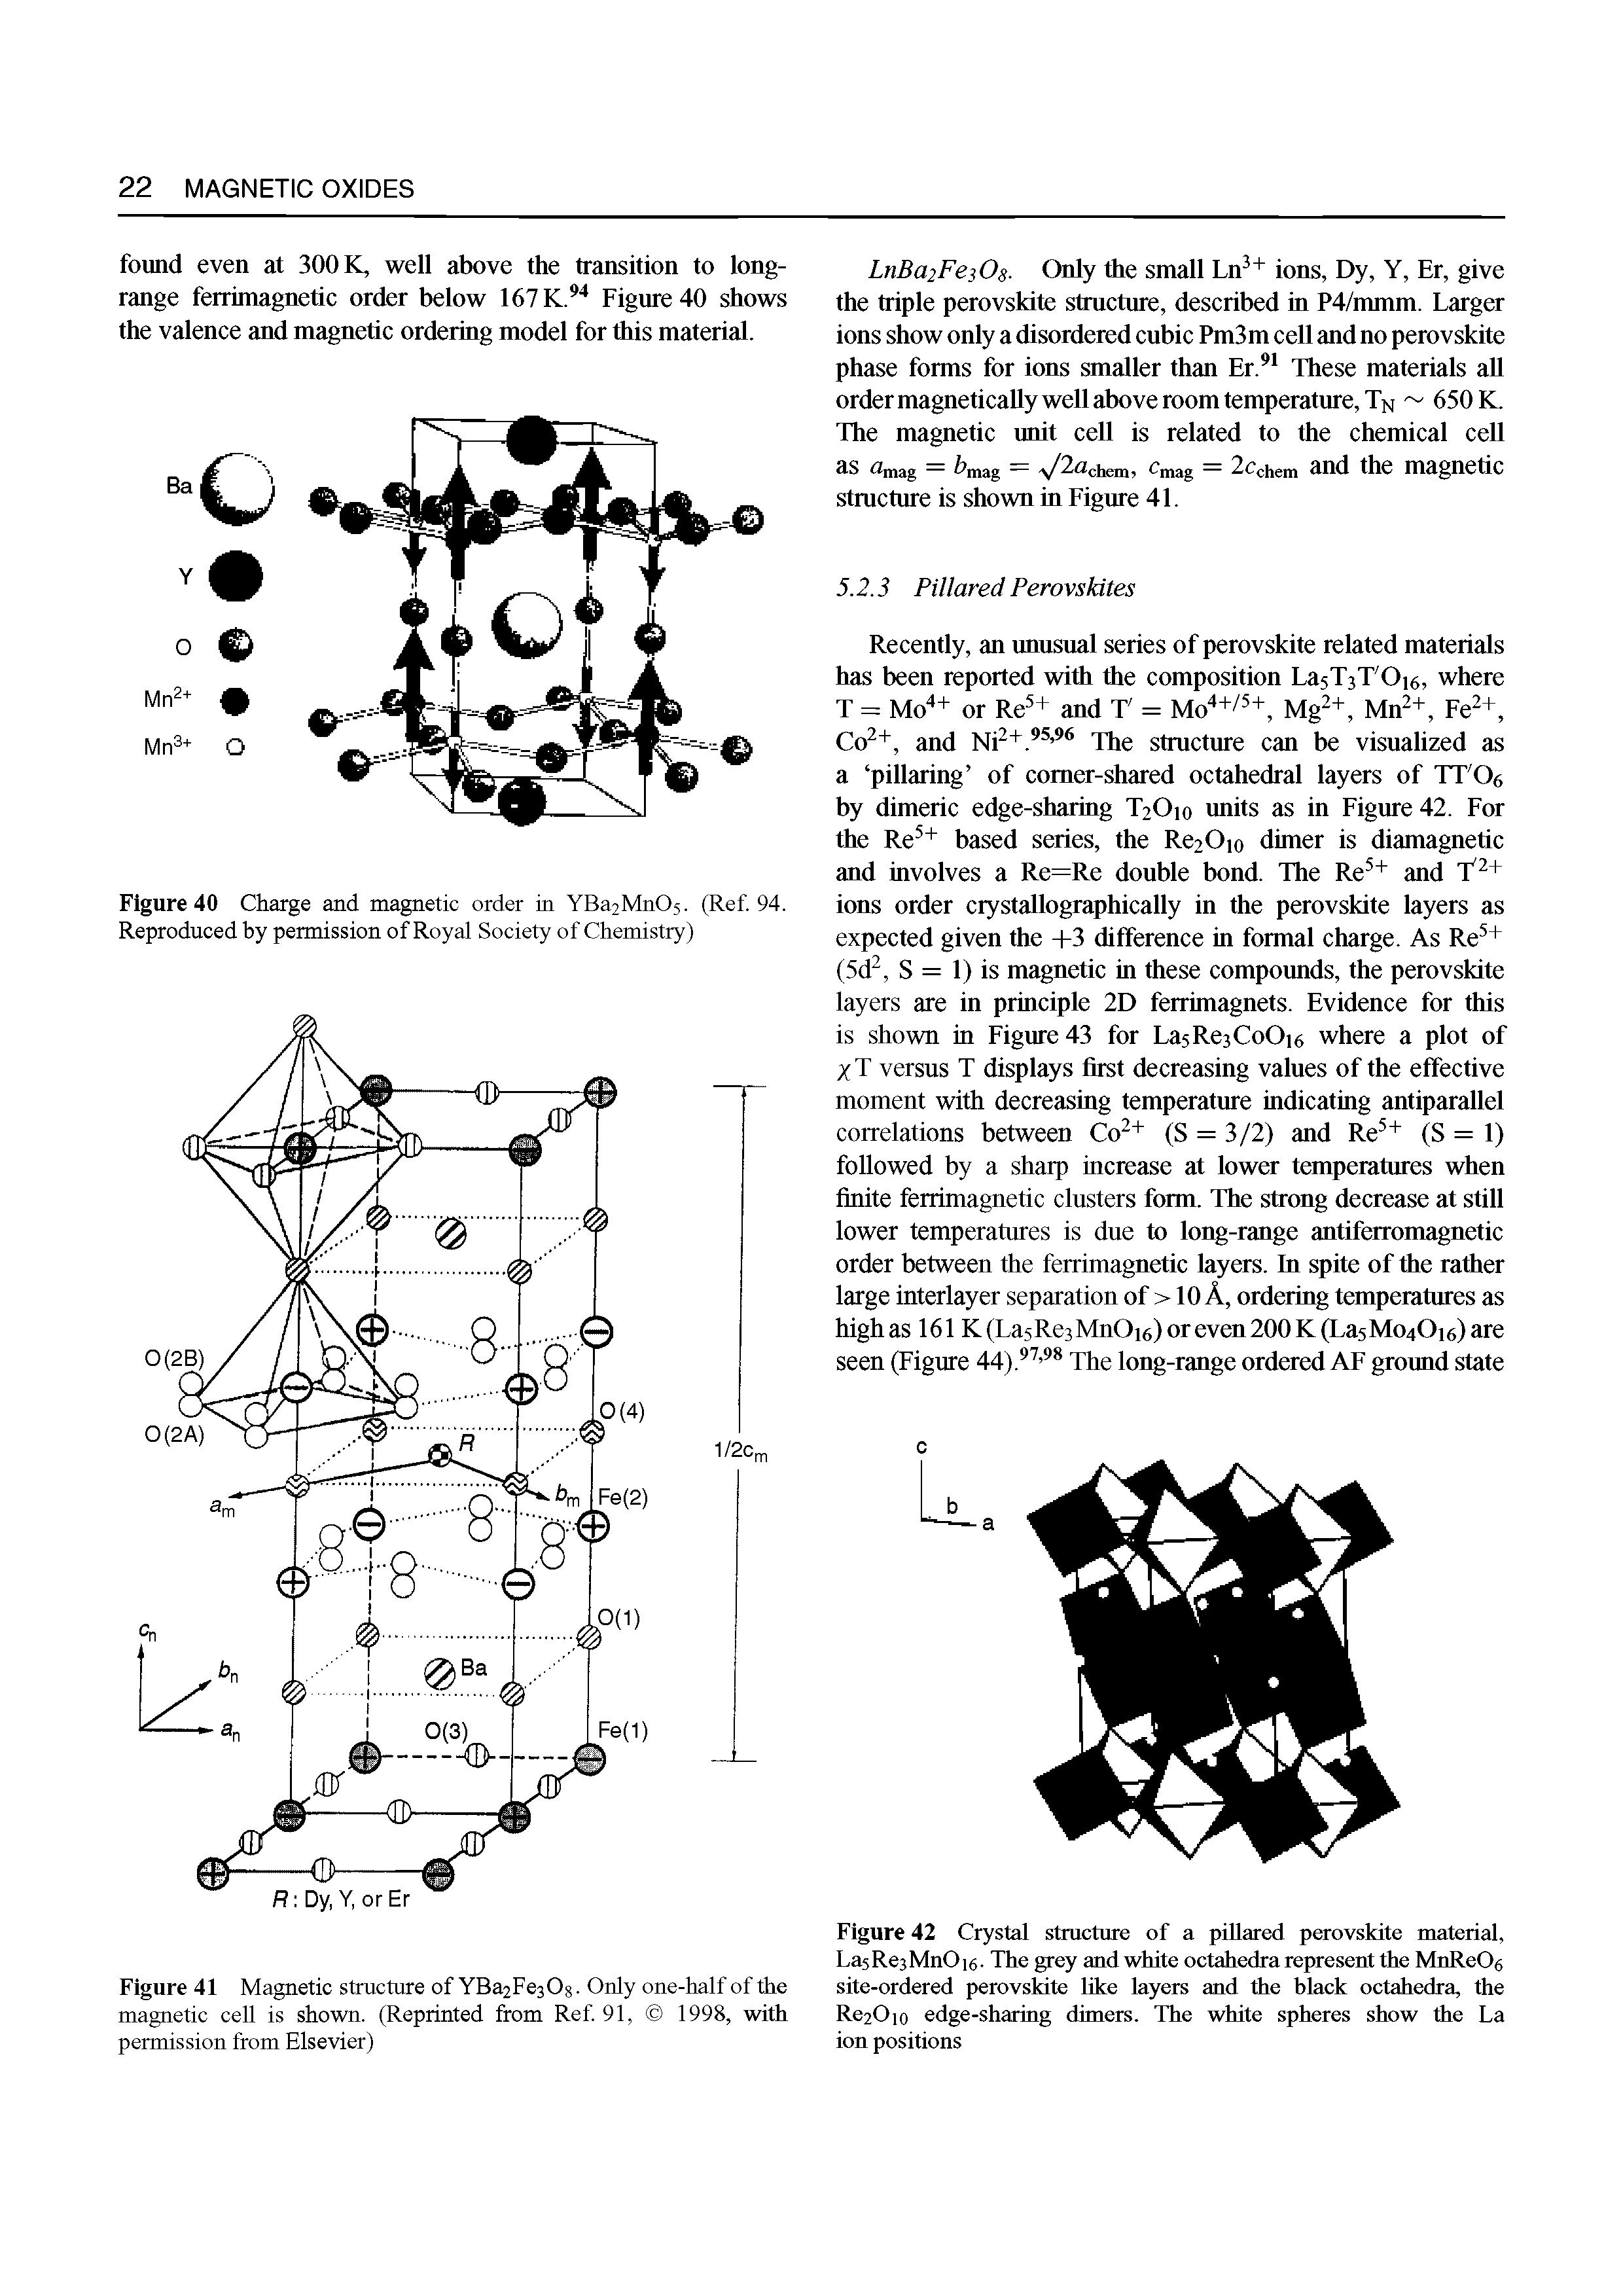 Figure 42 Crystal structure of a pillared perovskite material, LasResMnOie. The grey and white octahedra represent the MnReOe site-ordered perovskite like layers and the black octahedra, the Re20io edge-sharing dimers. The white spheres show the La ion positions...